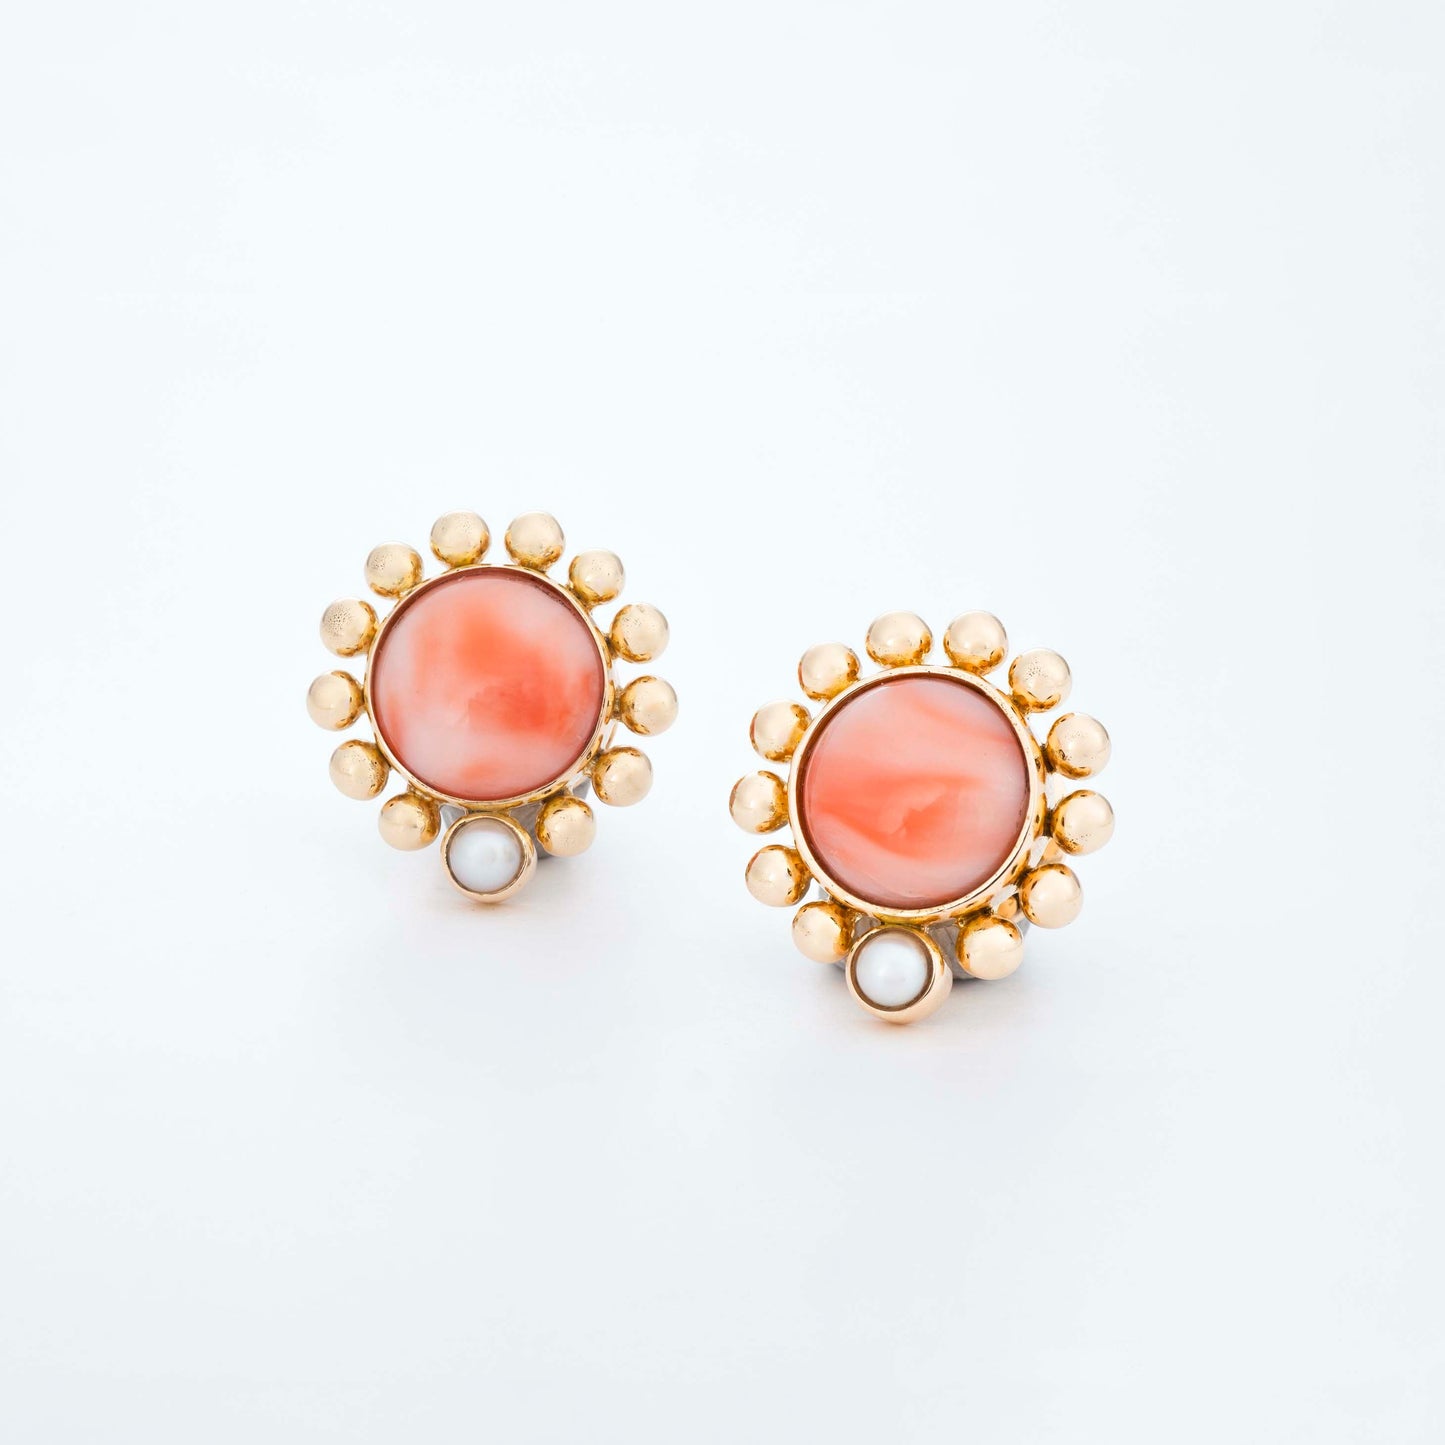 The Swati Gold, Coral and Pearl Ear Studs by Rasvihar